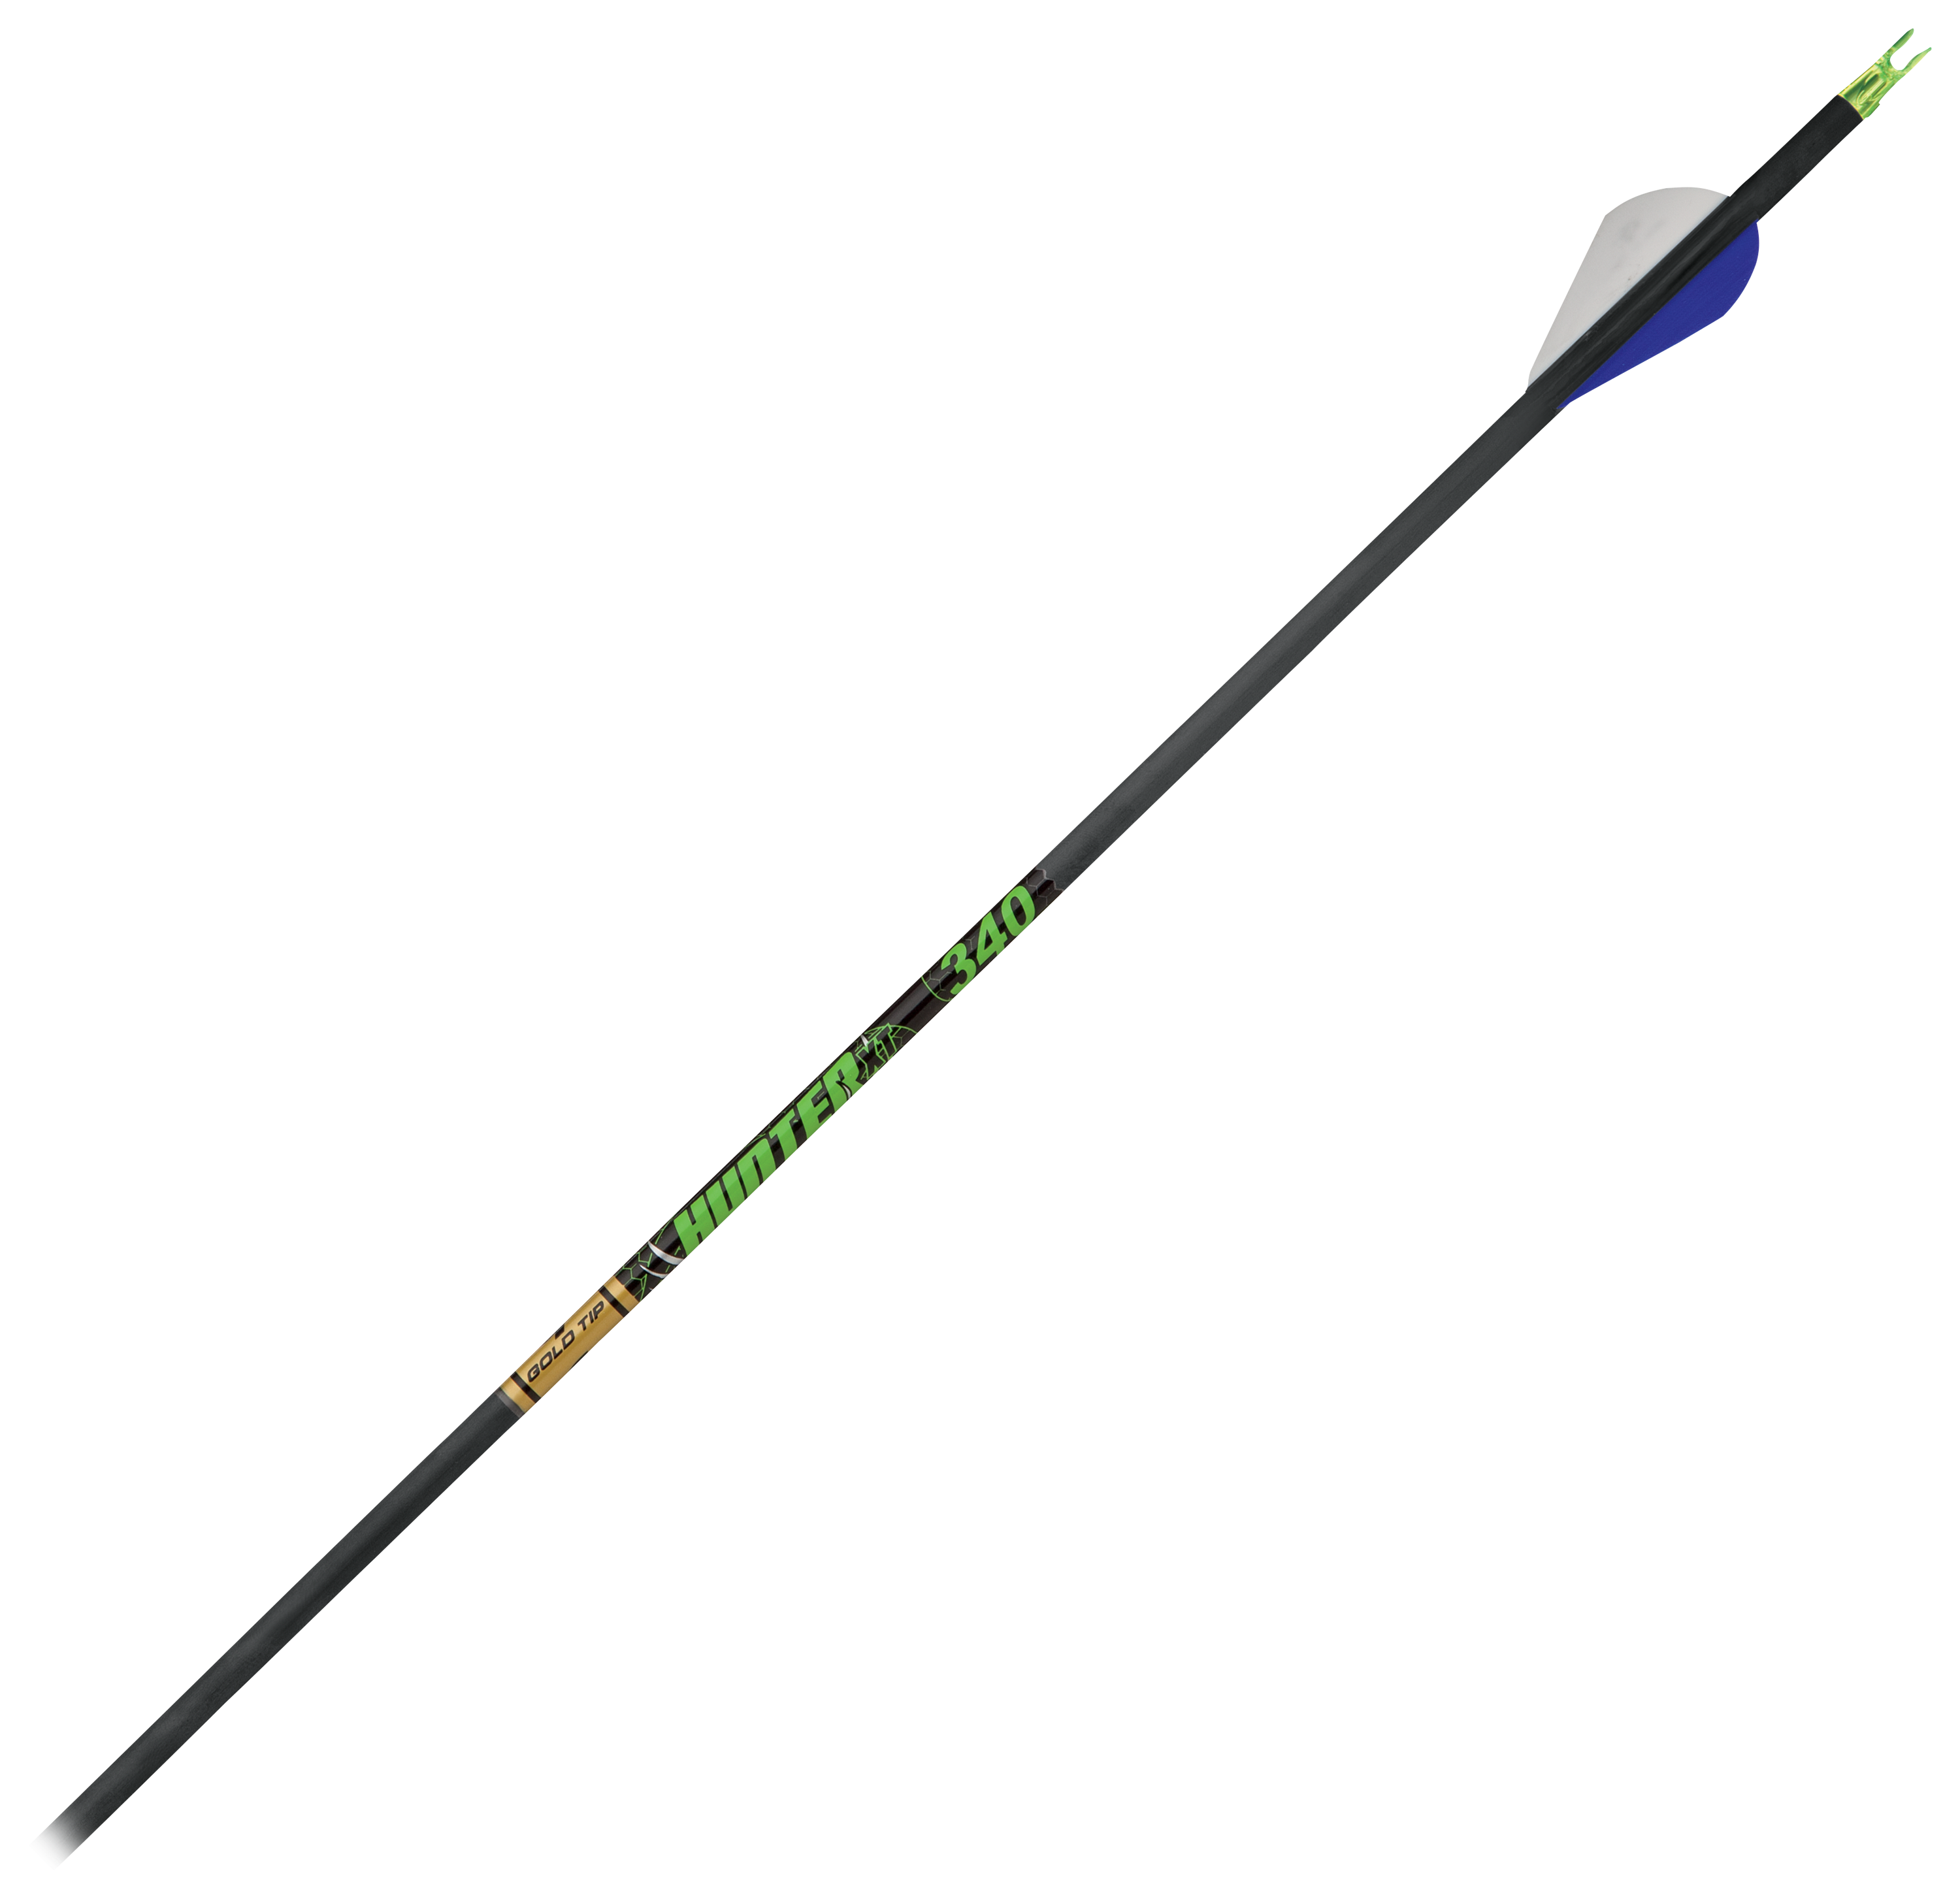 Gold Tip XT Hunter Carbon Hunting Arrows - Size 400